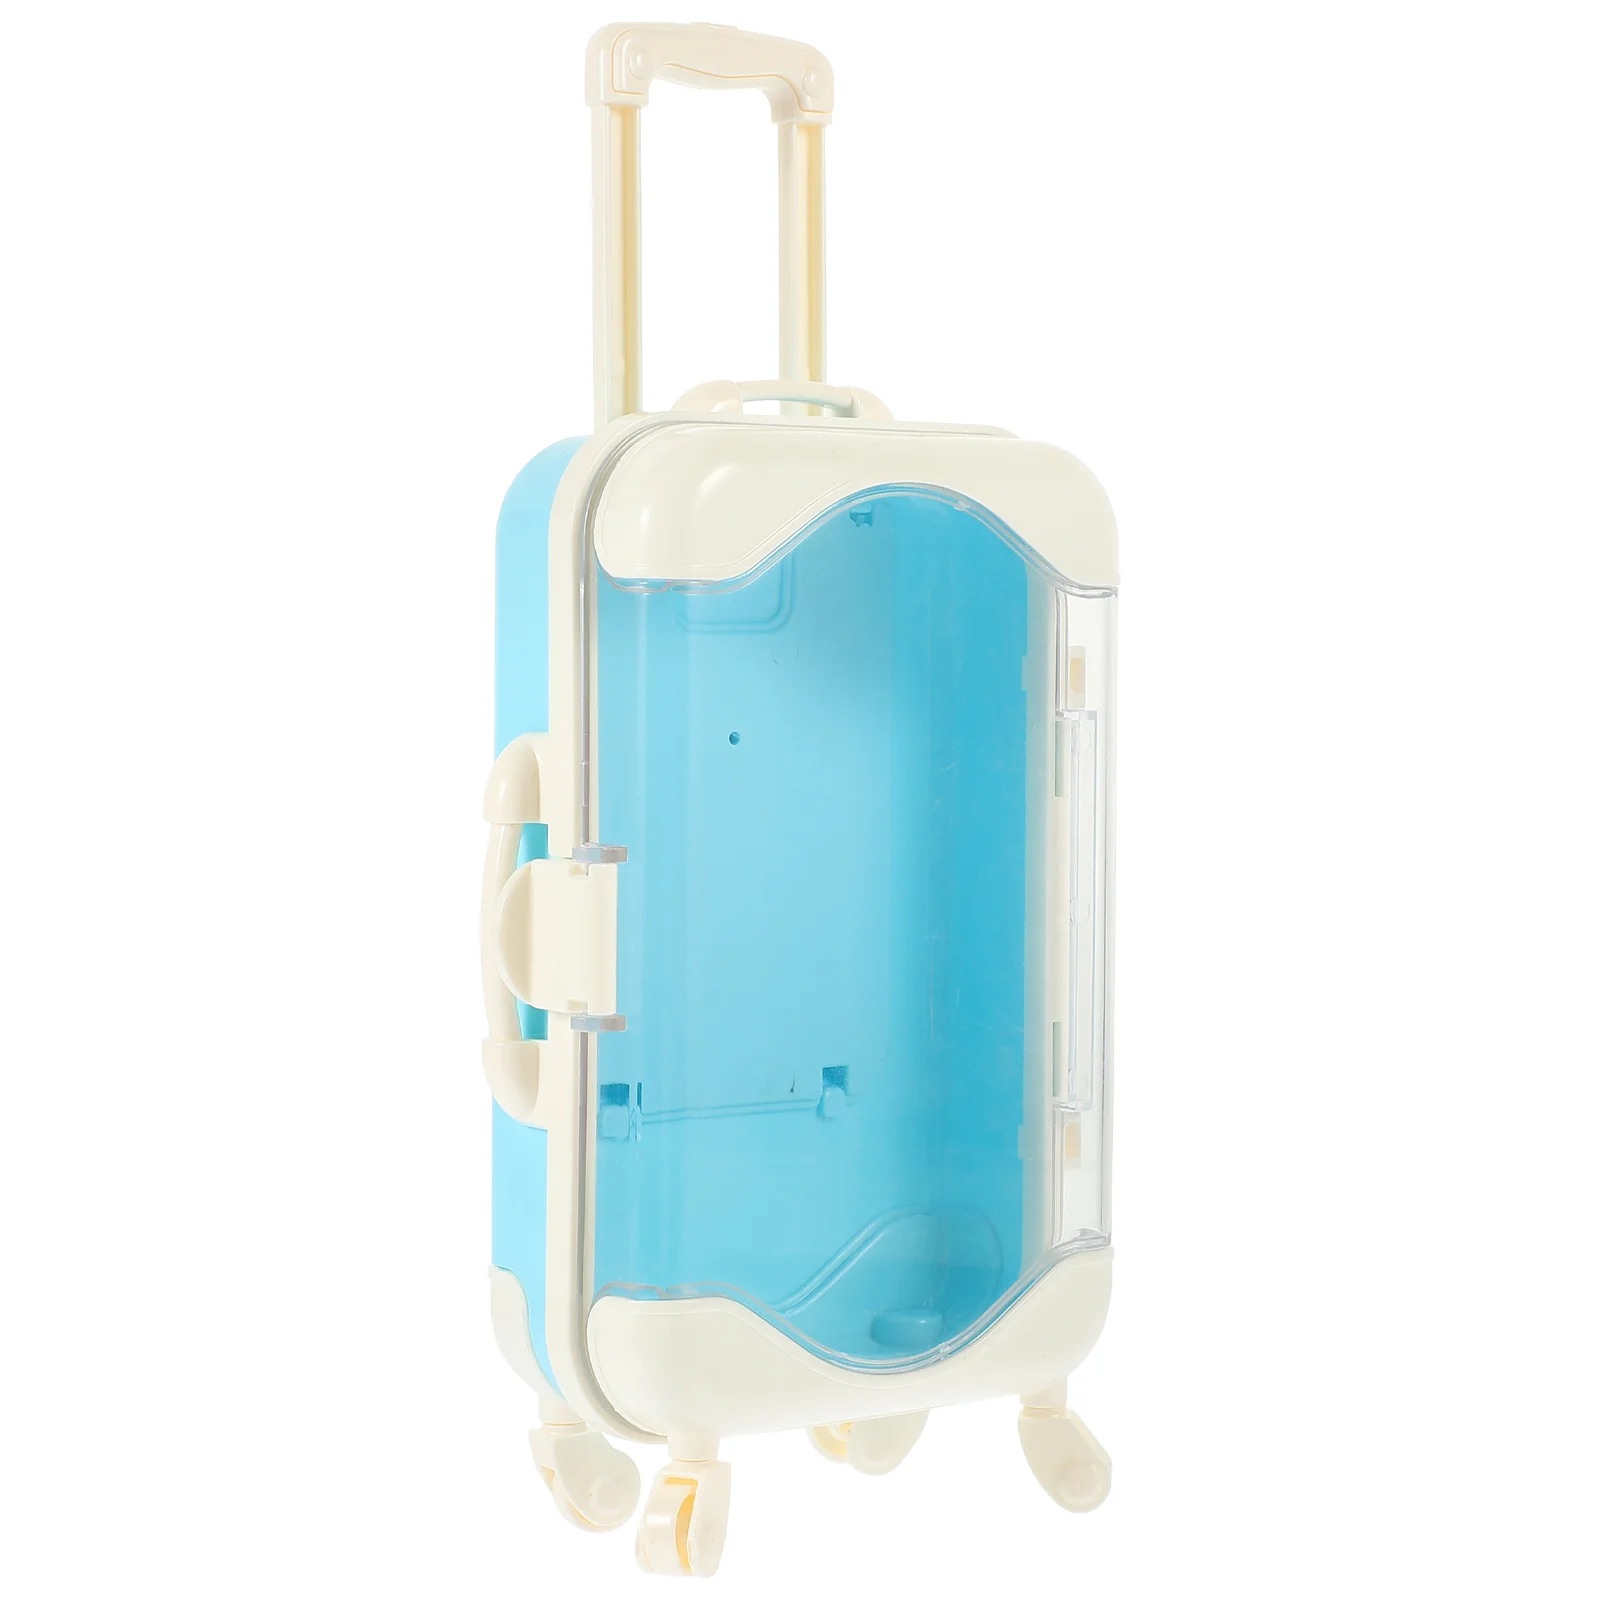 

Miniature Carrying Suitcase Compact Portable Luggage Toy Baby Carrying Suitcase Toy